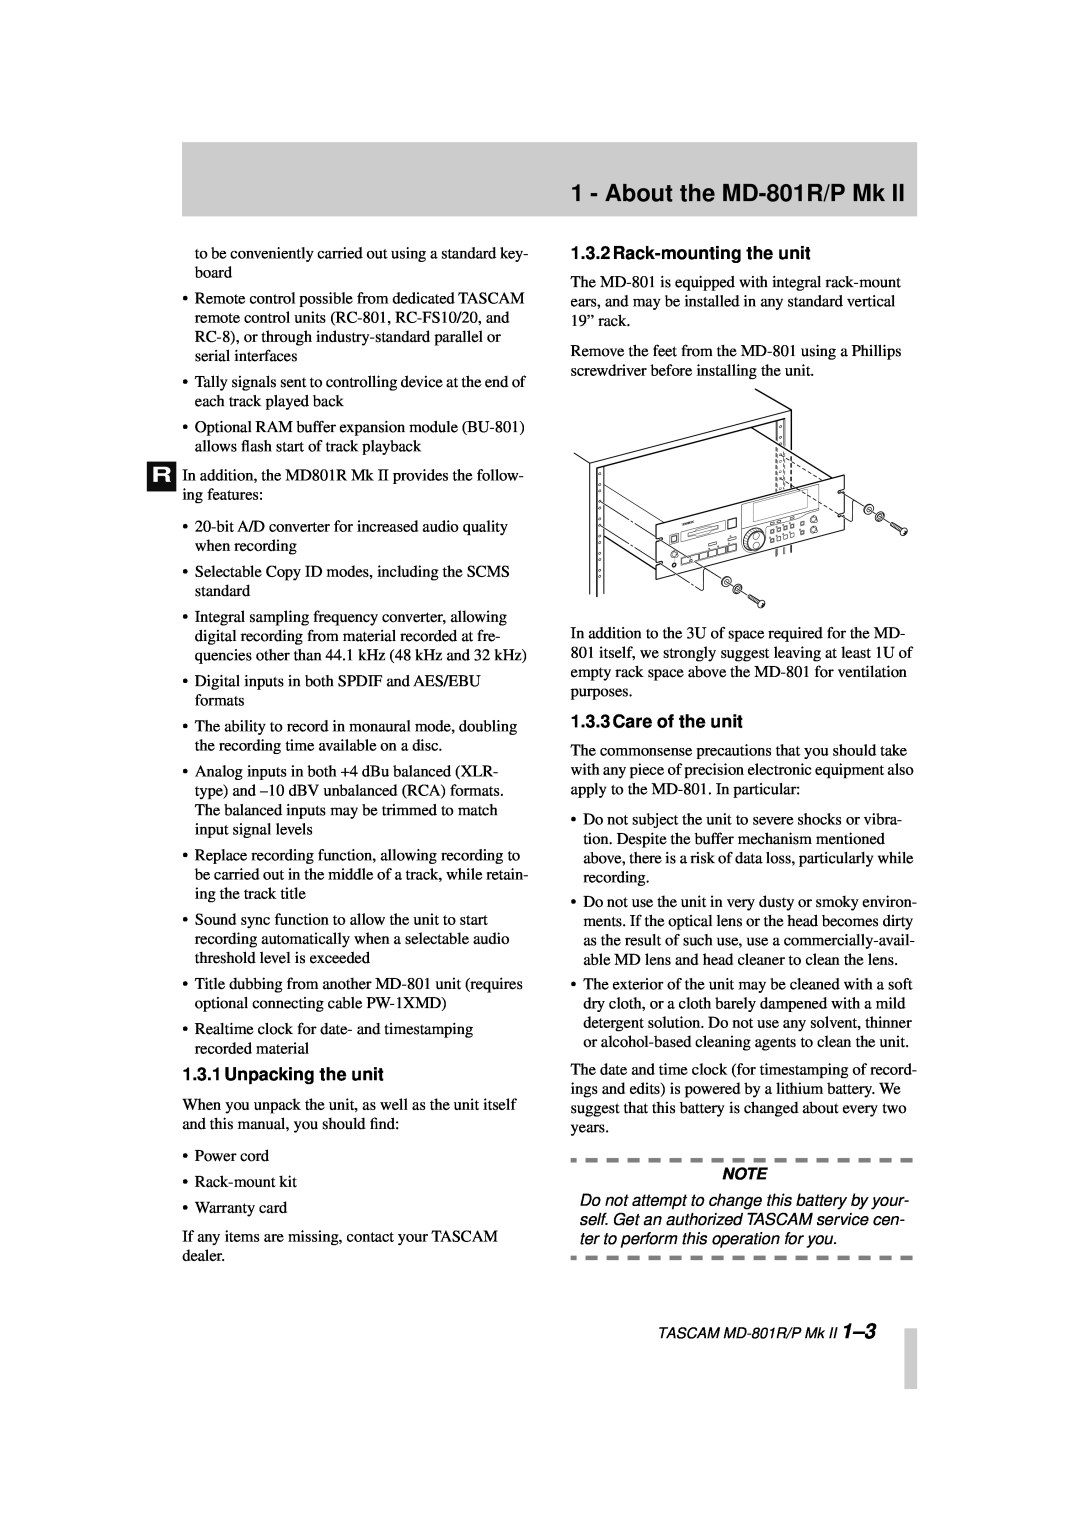 Tascam MD-801RMKII owner manual About the MD-801R/PMk, Unpacking the unit, Rack-mountingthe unit, Care of the unit 